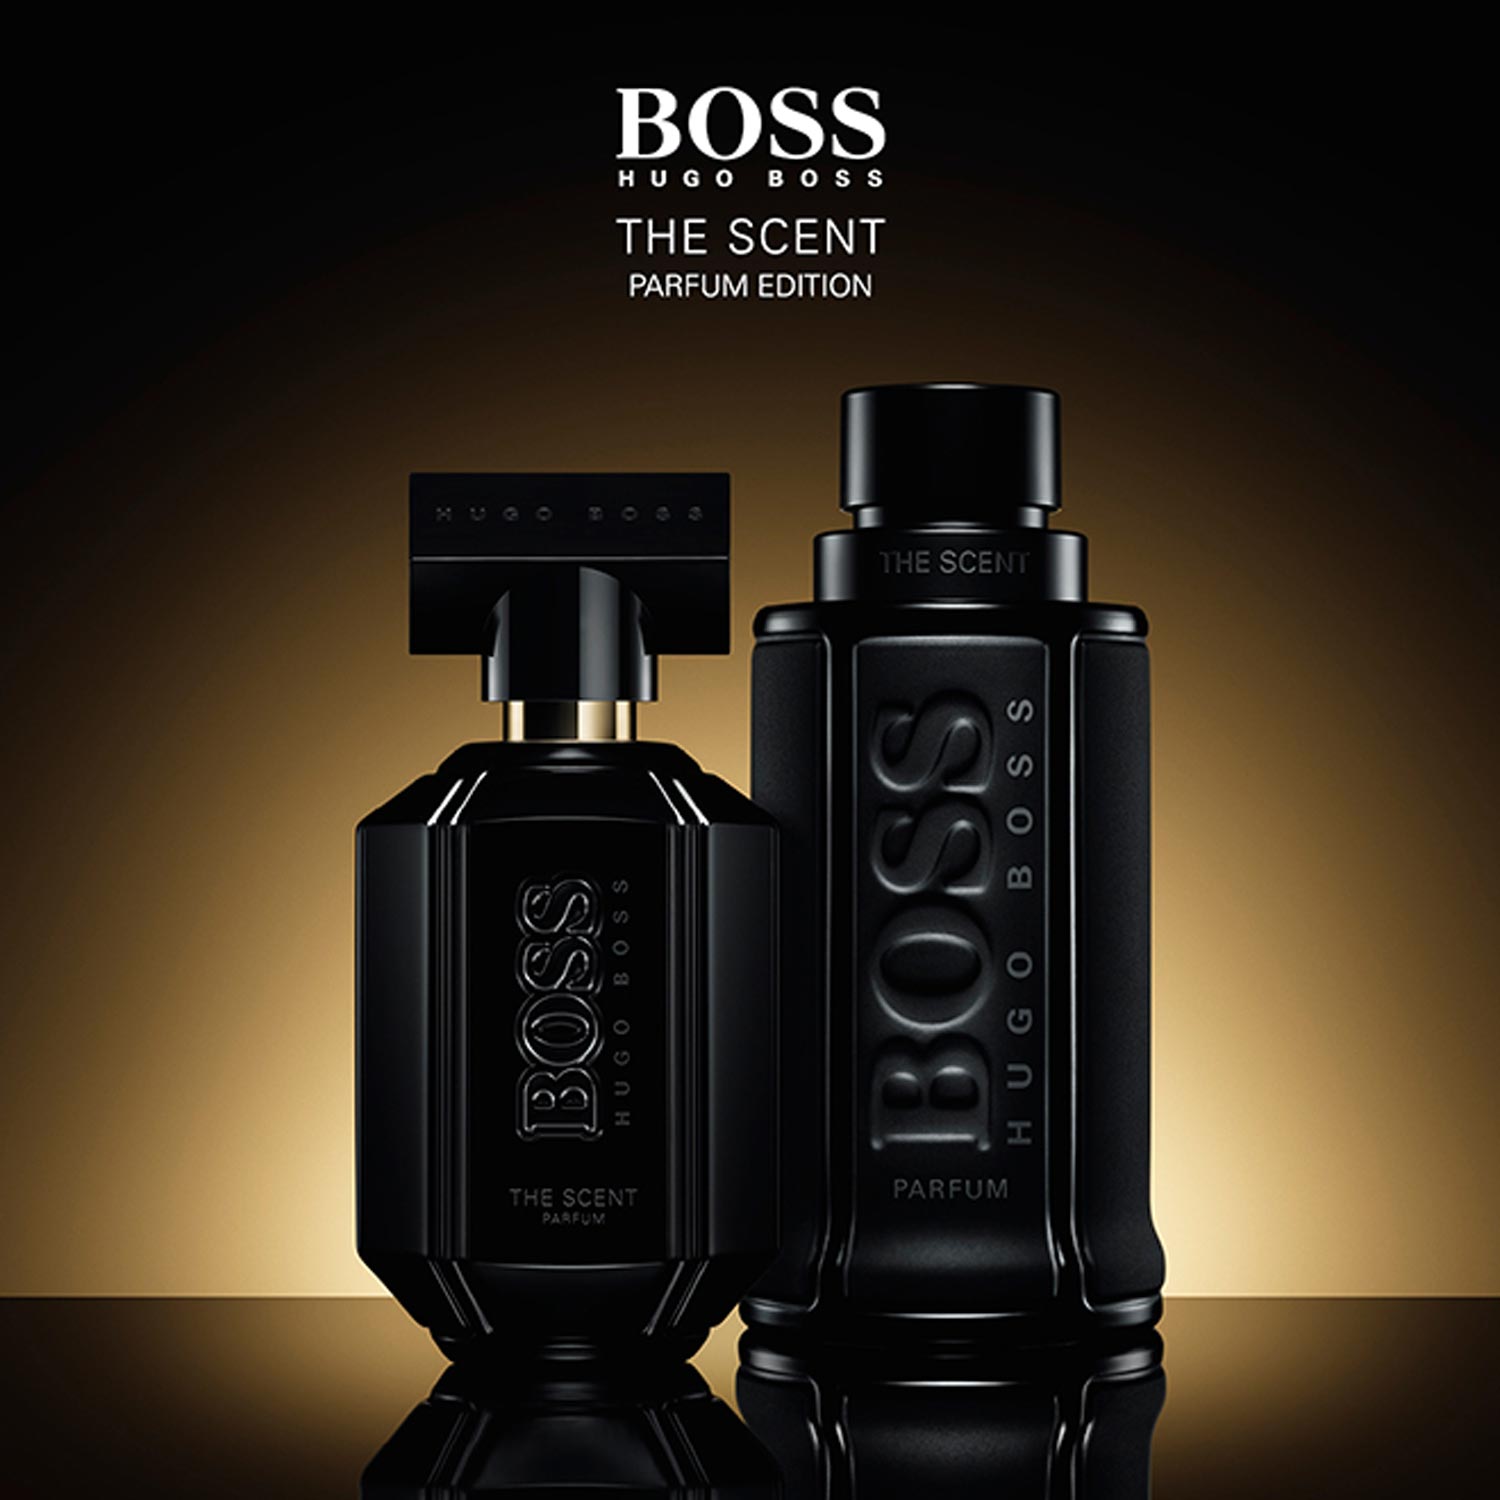 Scent. Hugo Boss the Scent Parfum Edition. Hugo Boss the Scent для мужчин. Парфюм Boss the Scent Hugo Boss. Парфюм Boss the Scent for him.